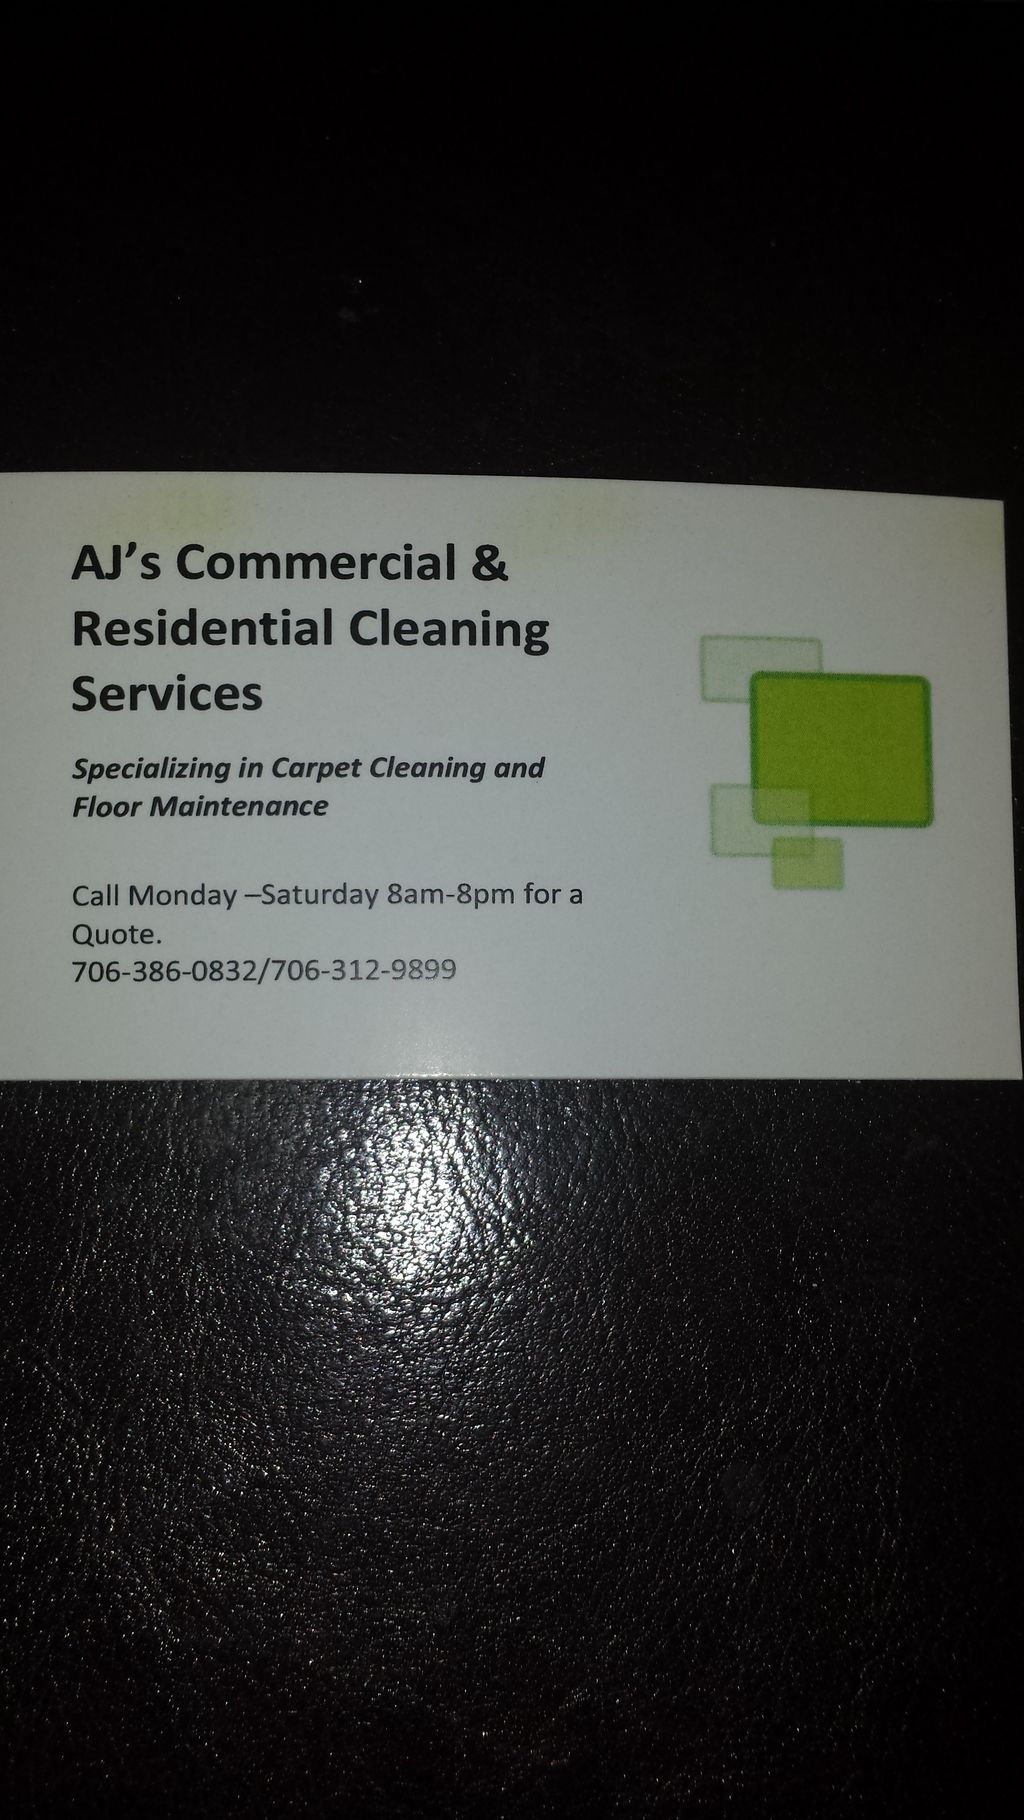 AJ's Commercial and Residential Cleaning